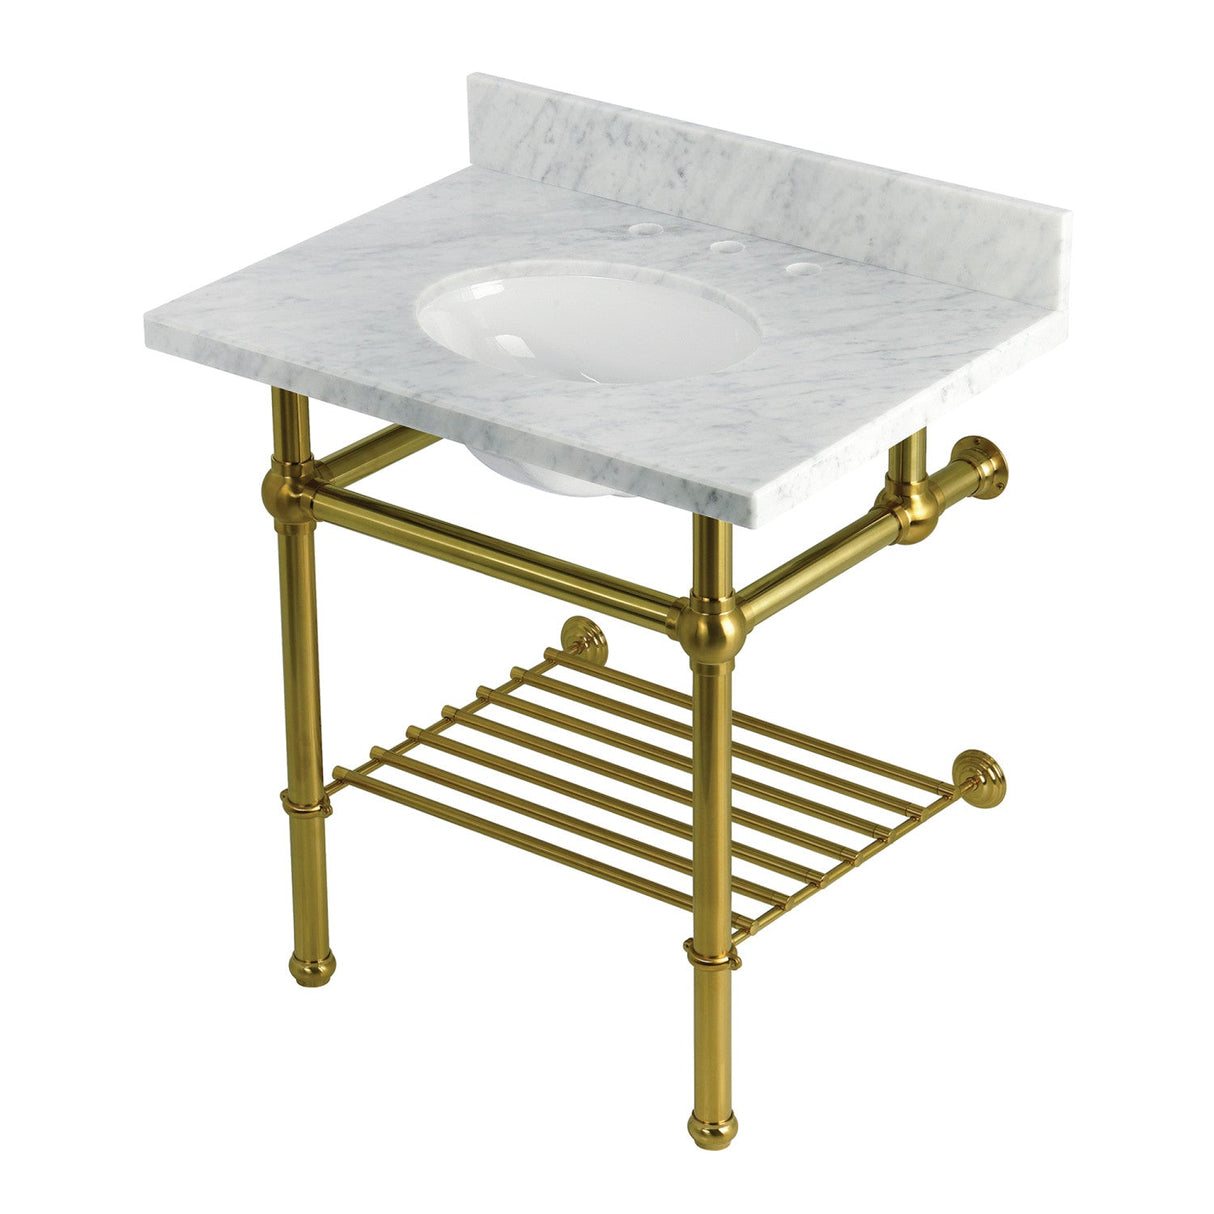 Templeton KVPB3030MBB7 30-Inch Console Sink with Brass Legs (8-Inch, 3 Hole), Carrara Marble/Brushed Brass